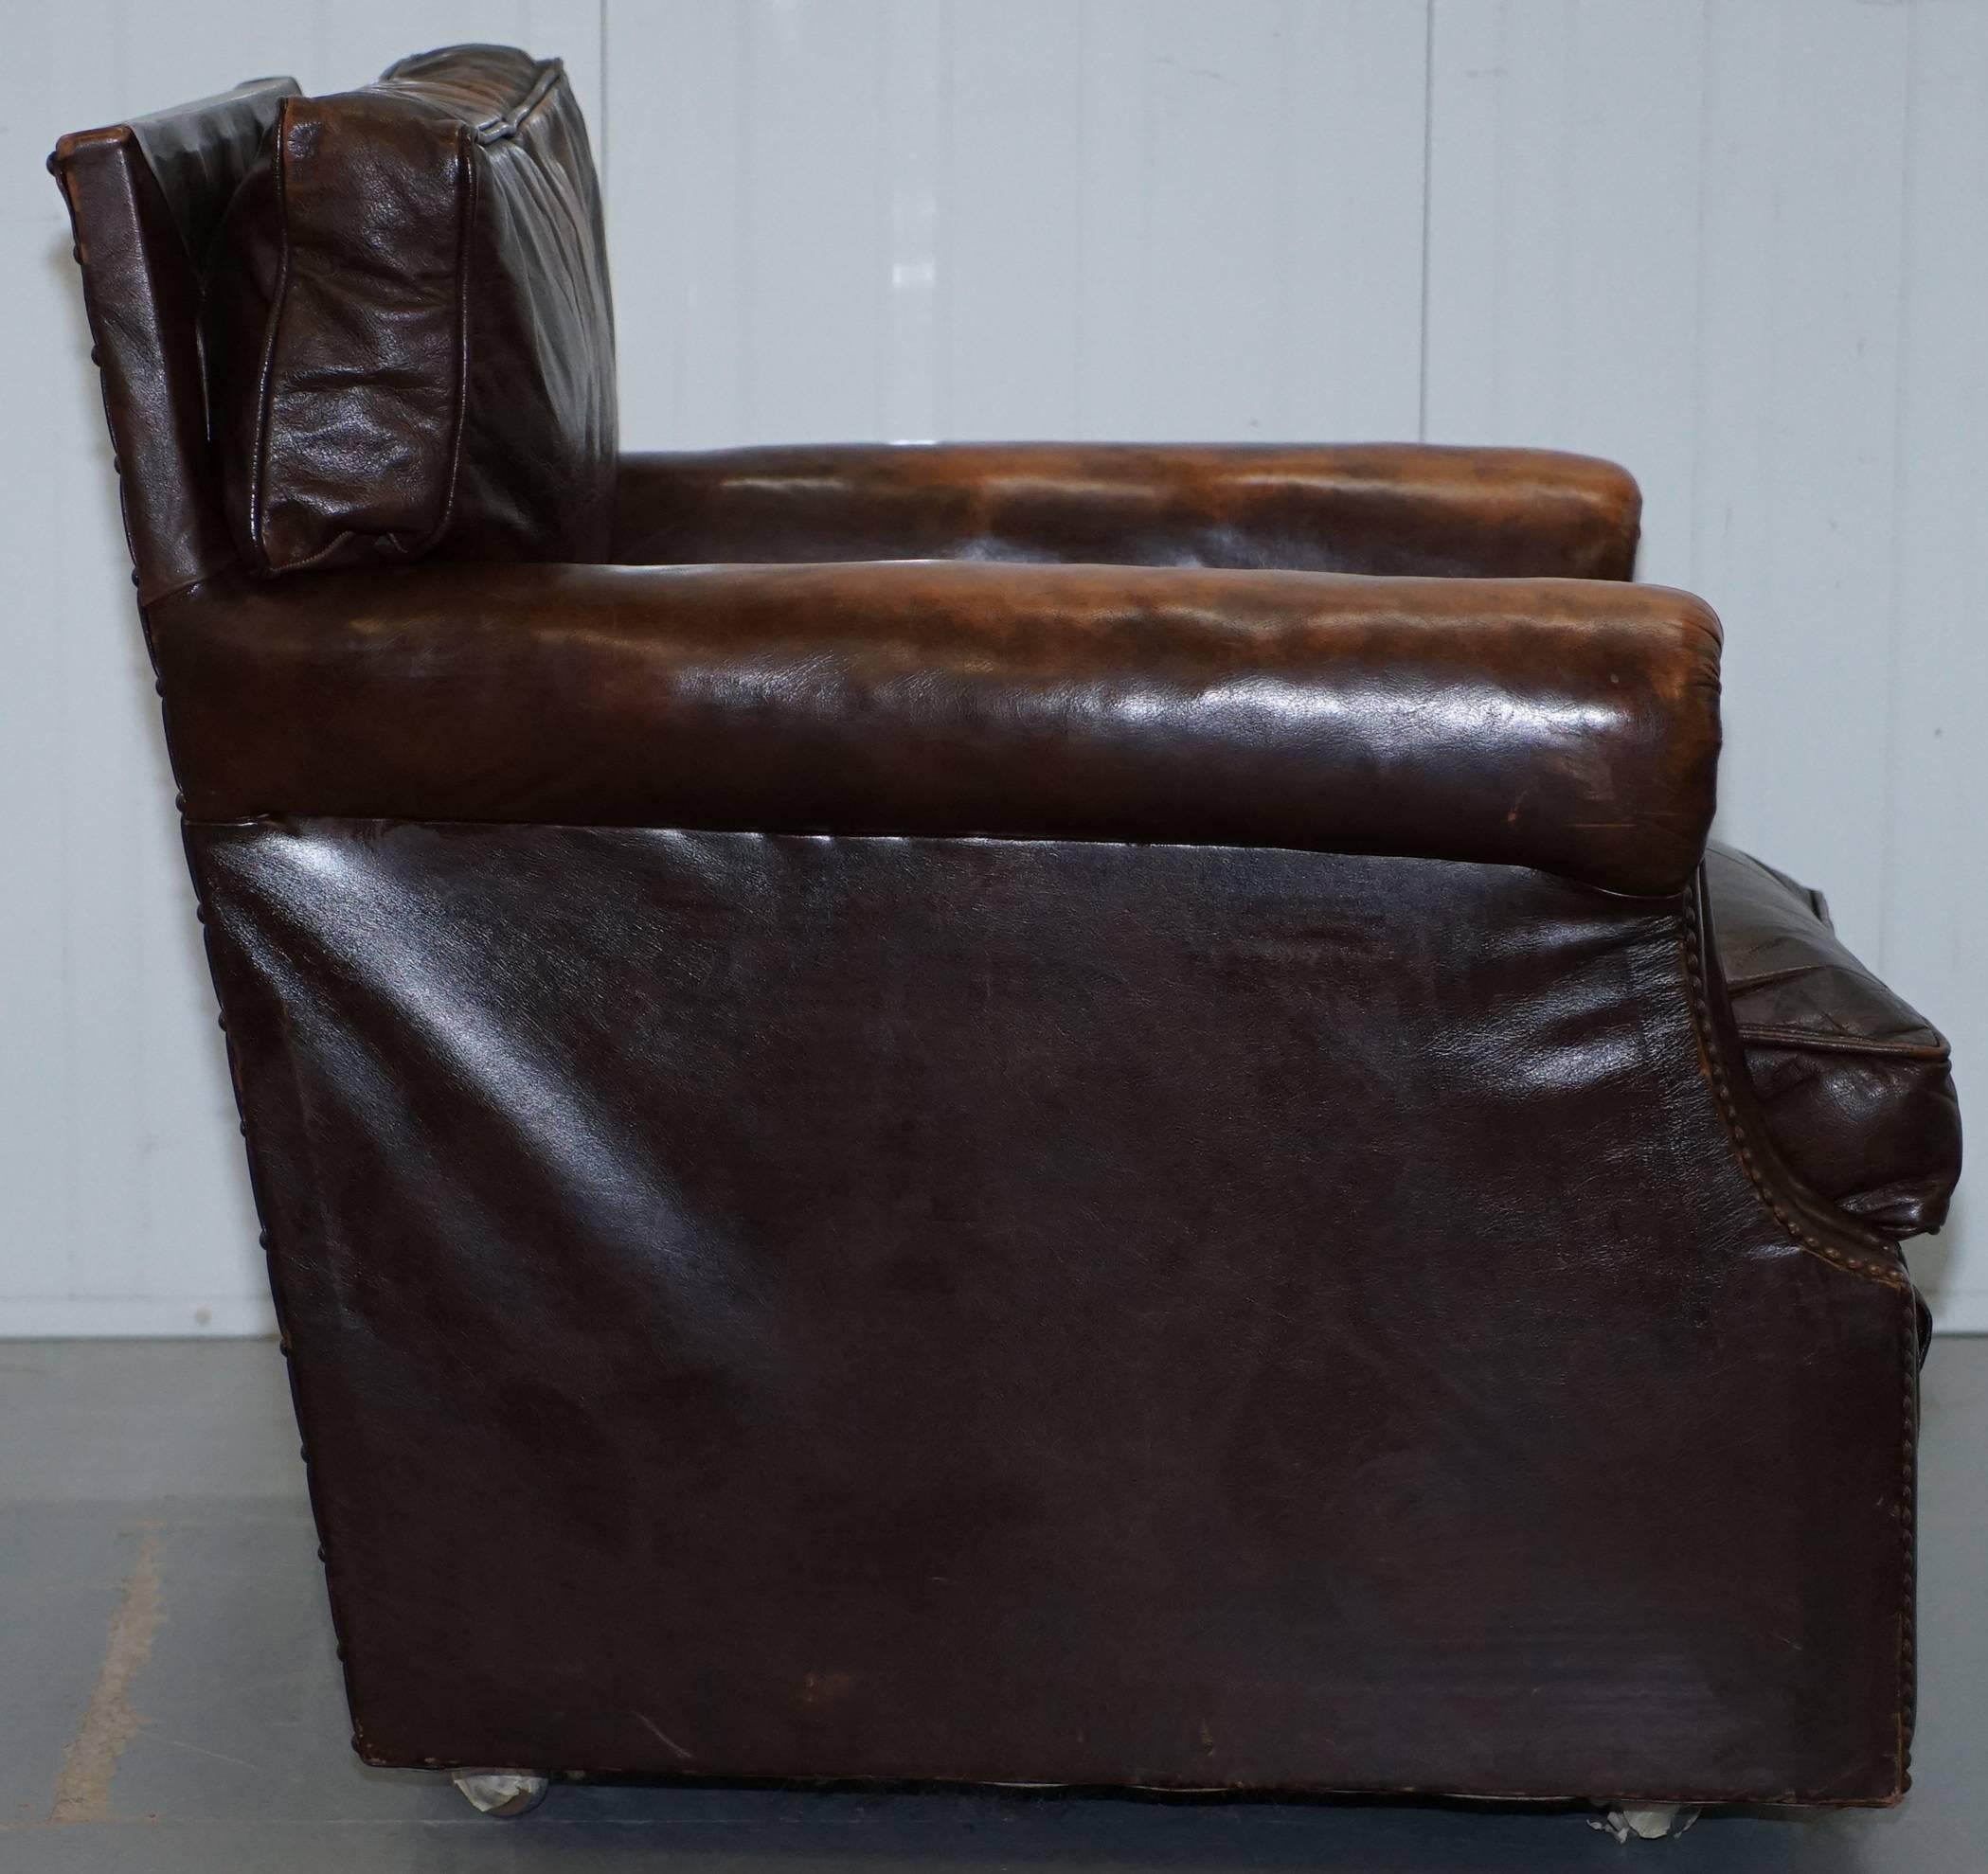 Vintage 1920s Coil Sprung Aged Brown Leather Club Armchair on Castors Rare Find 9